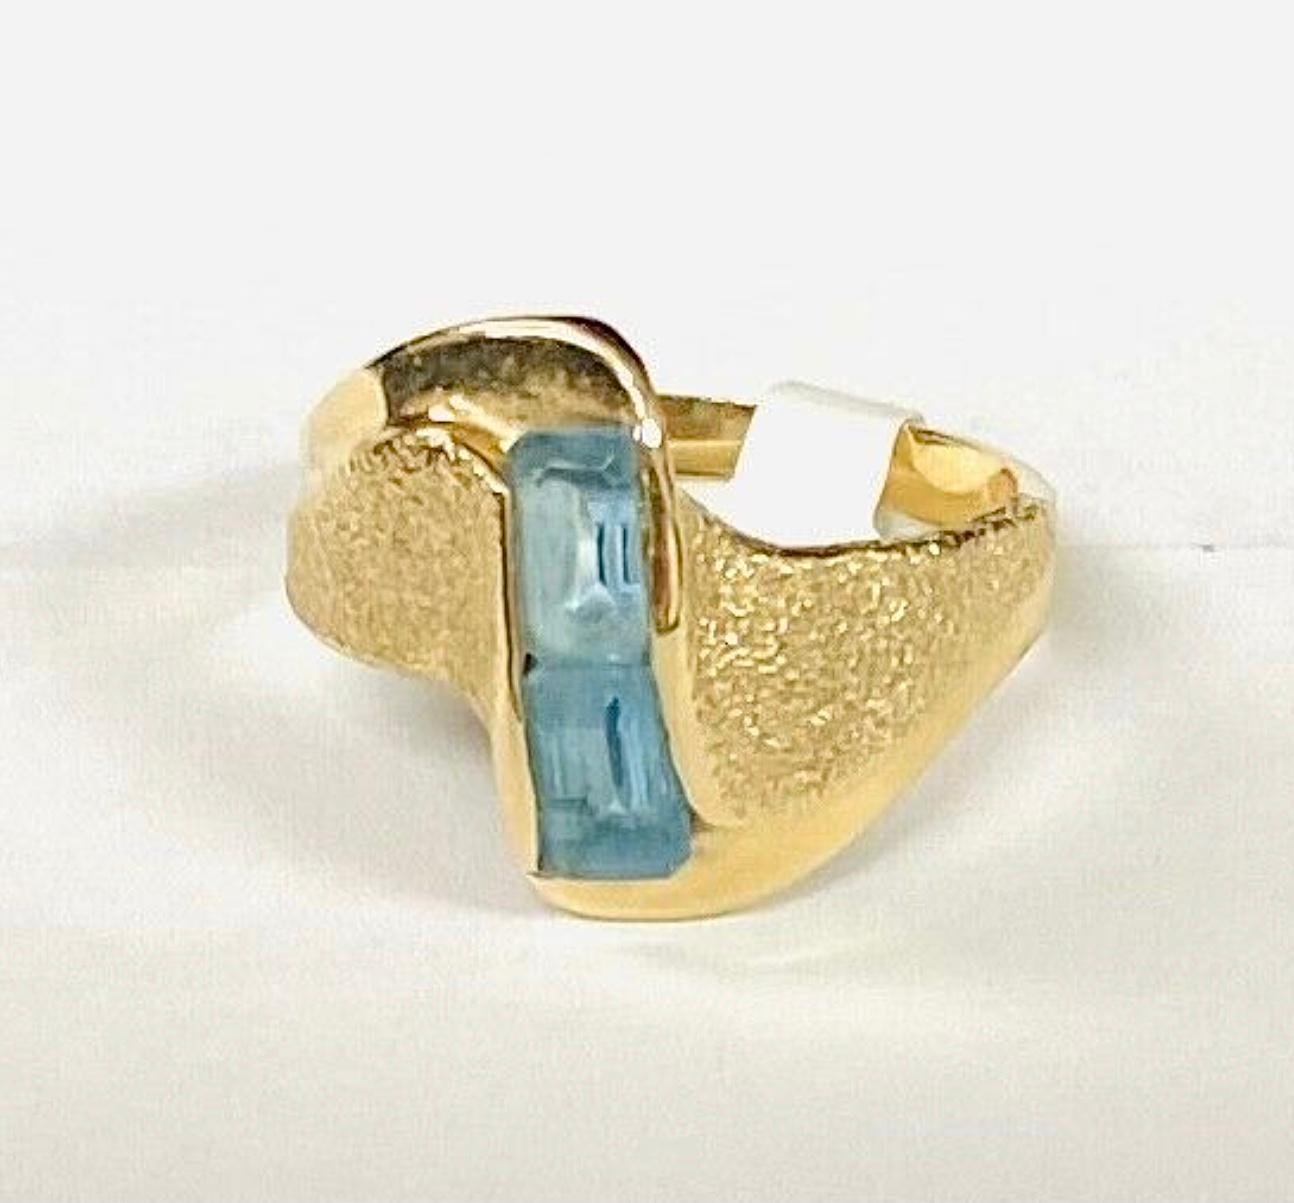 14k yellow gold 2 stone aquamarine ring. The dimensions of the two aquamarines are approximately 5.5mm x 4 mm each. Each stone approximately 1/2 carat for a total of 1 CTW.
Marked 14k. Approximate size 7.